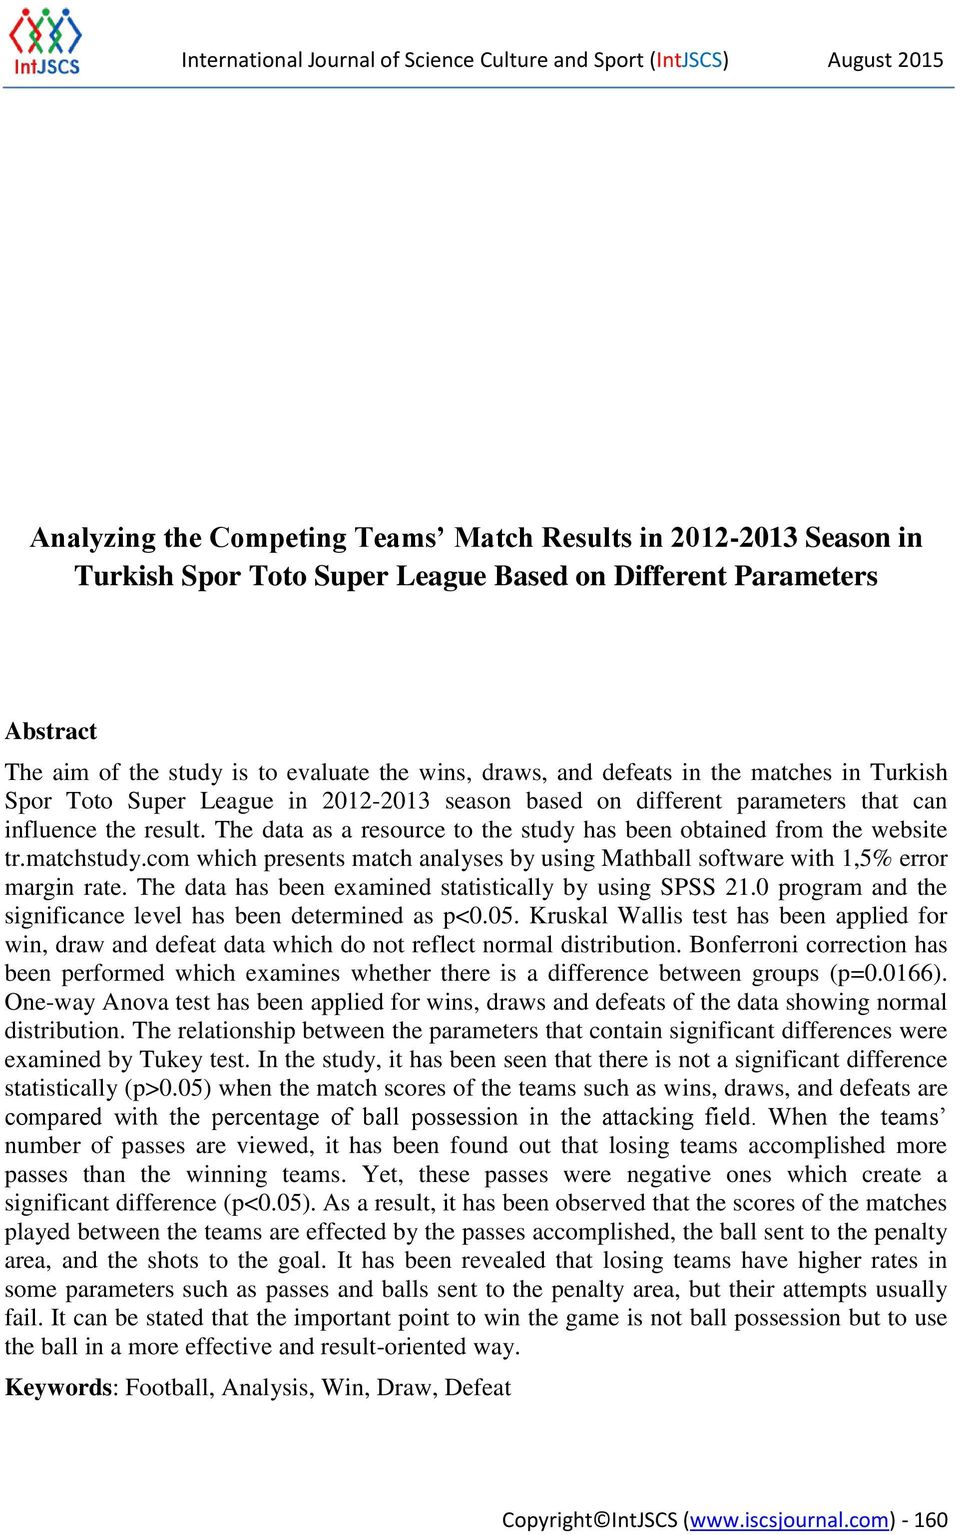 influence the result. The data as a resource to the study has been obtained from the website tr.matchstudy.com which presents match analyses by using Mathball software with 1,5% error margin rate.